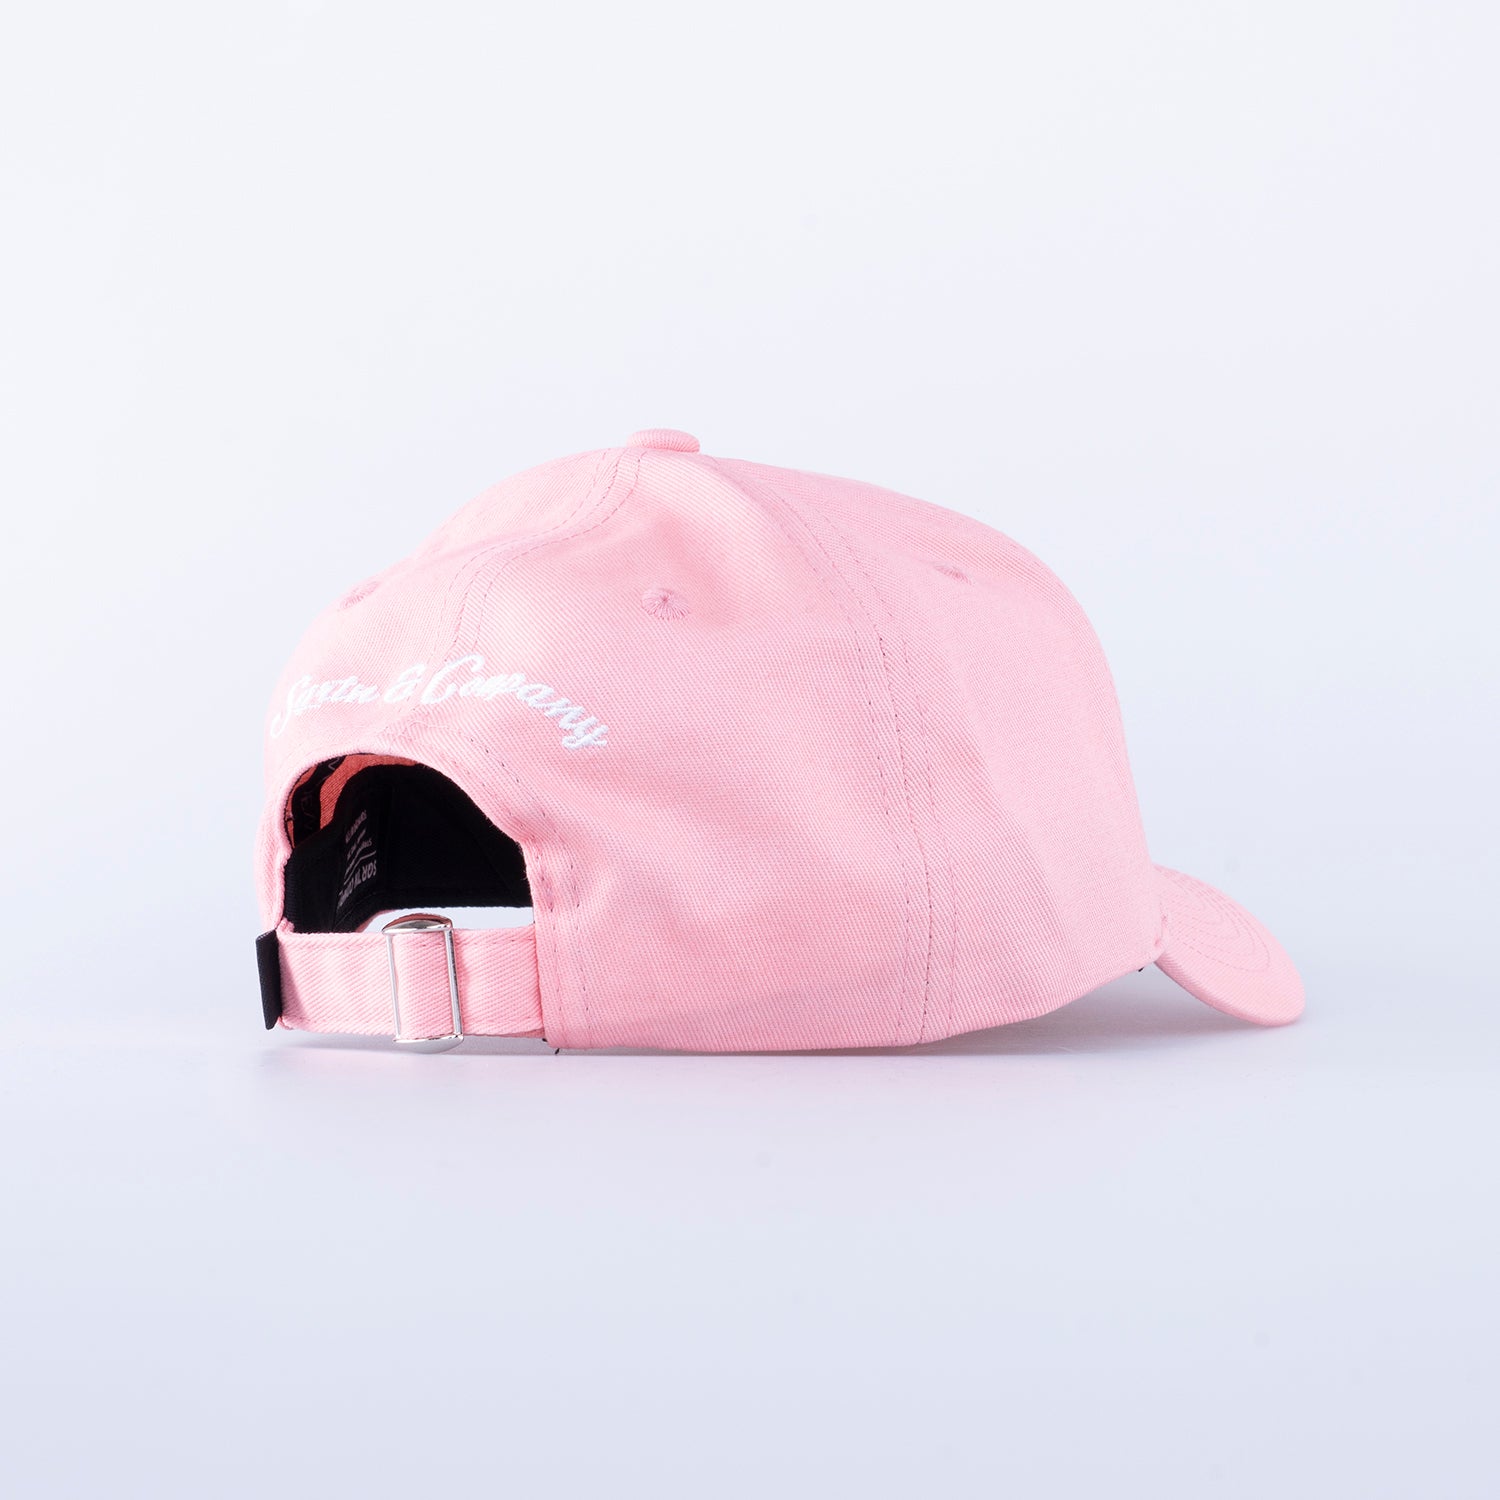 GREAT NORRLAND CAP - HOOKED PINK